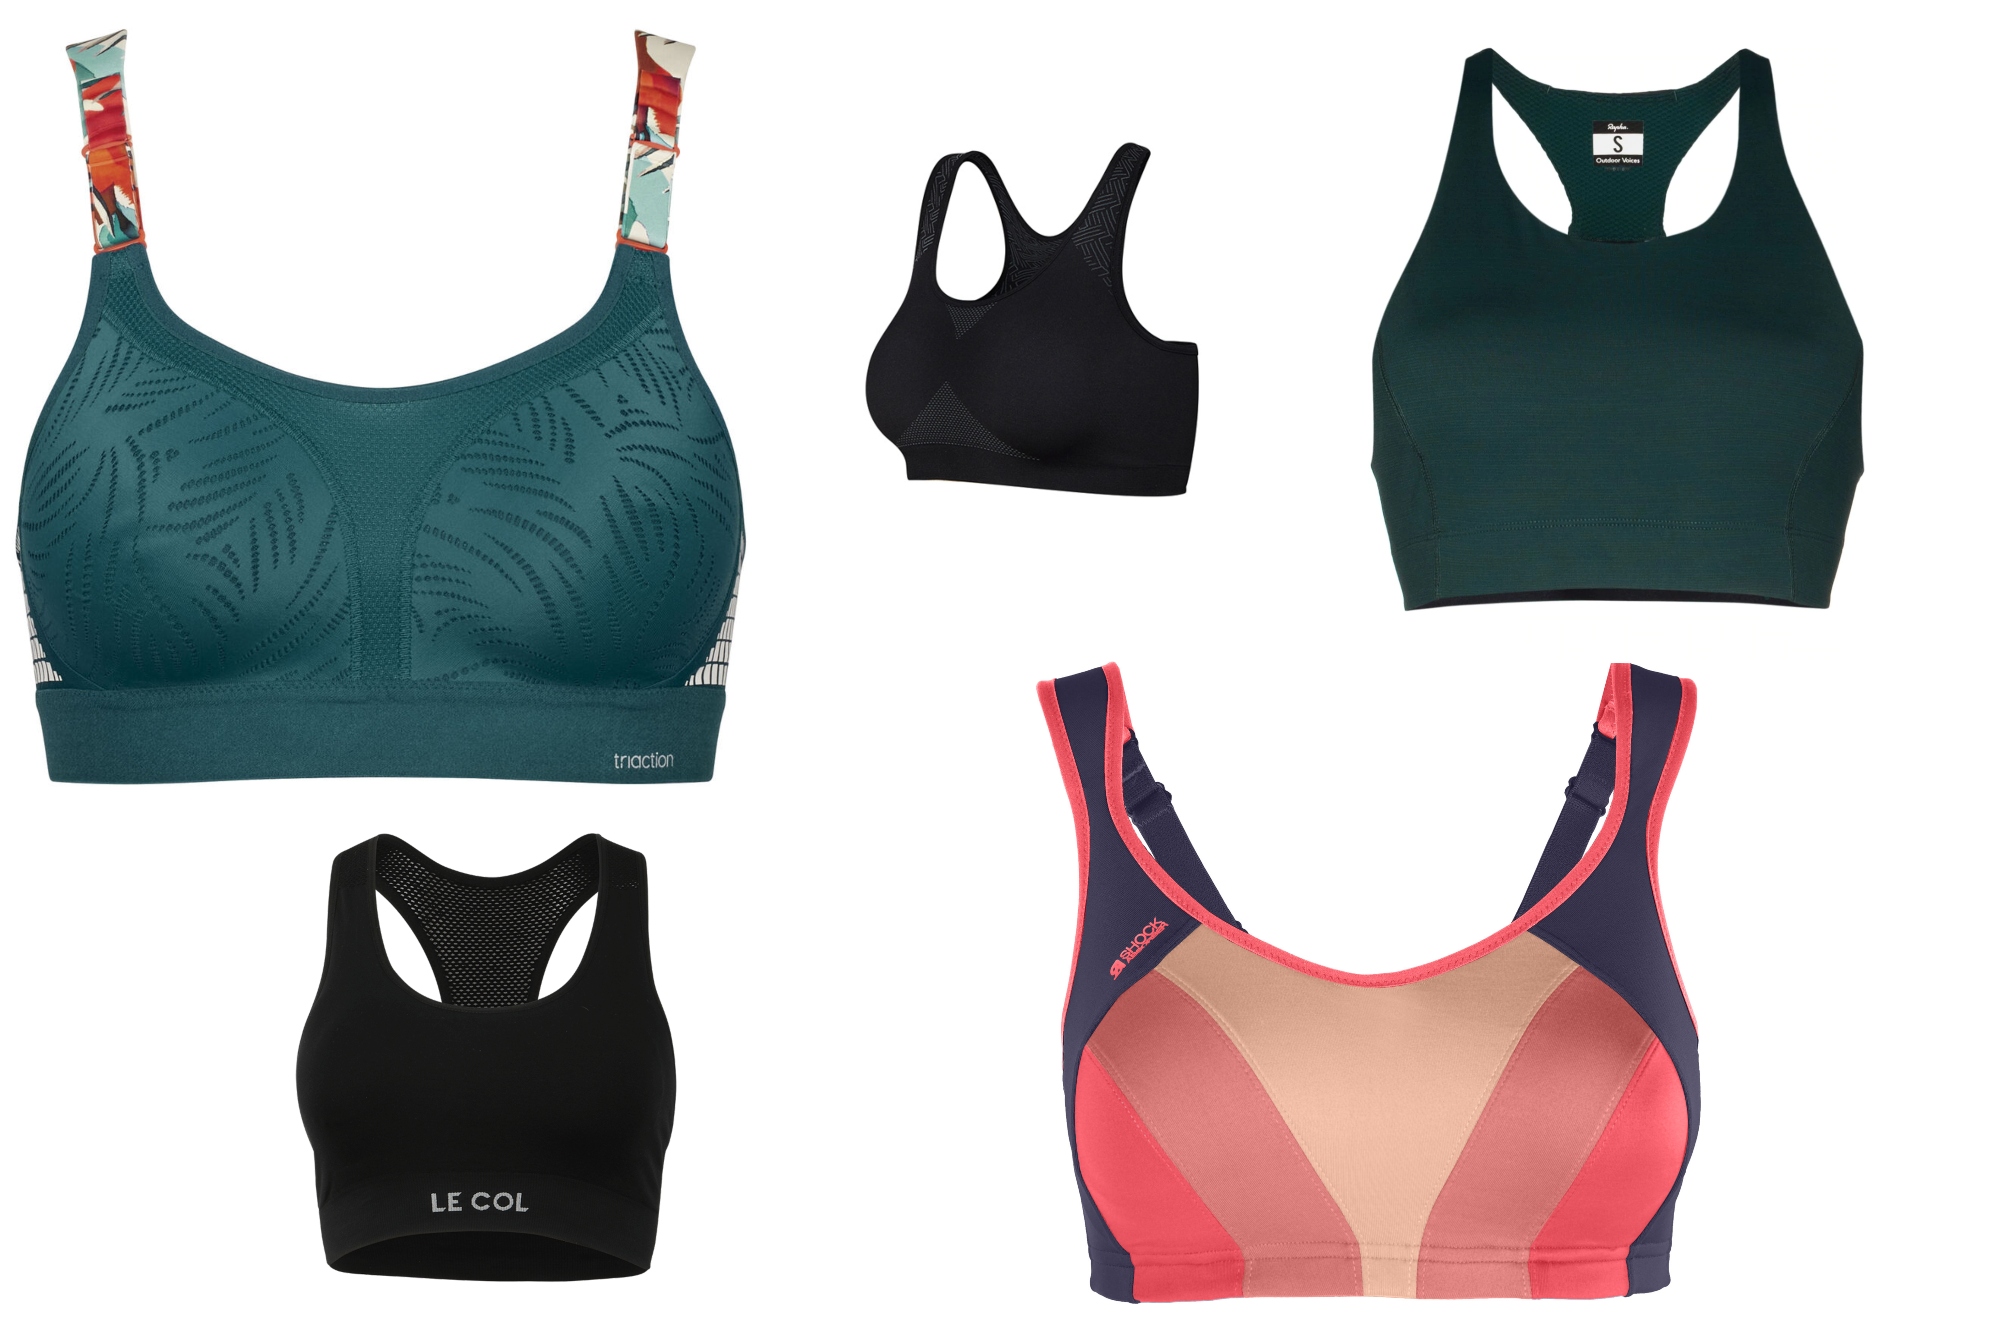 Best sports bras for cycling: the search for support and quick